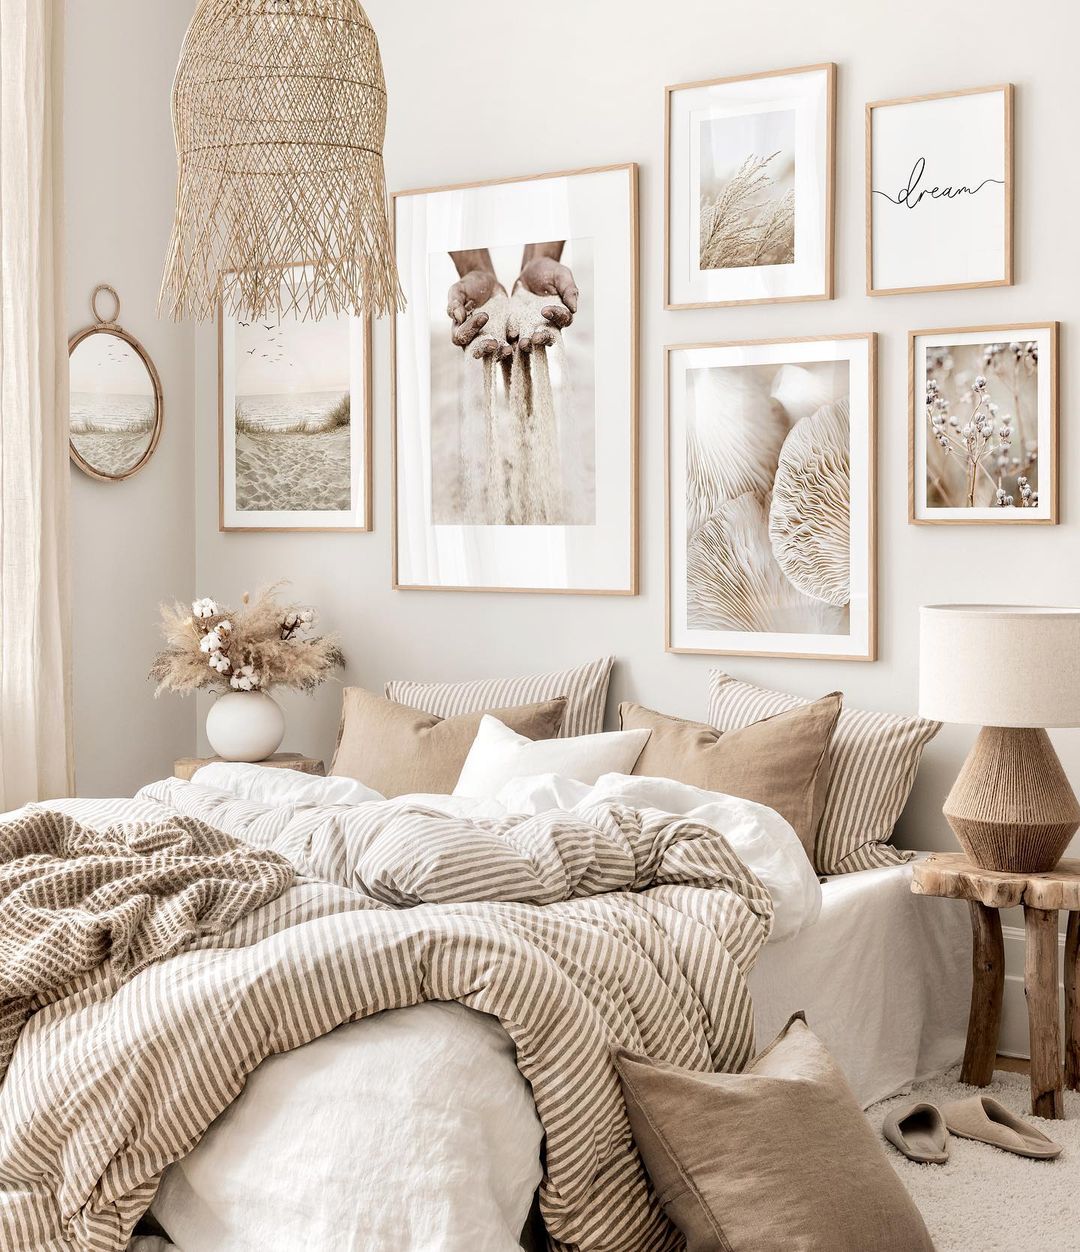 Top 20 Decorating Ideas For A Better Bedroom in 20   Decoholic